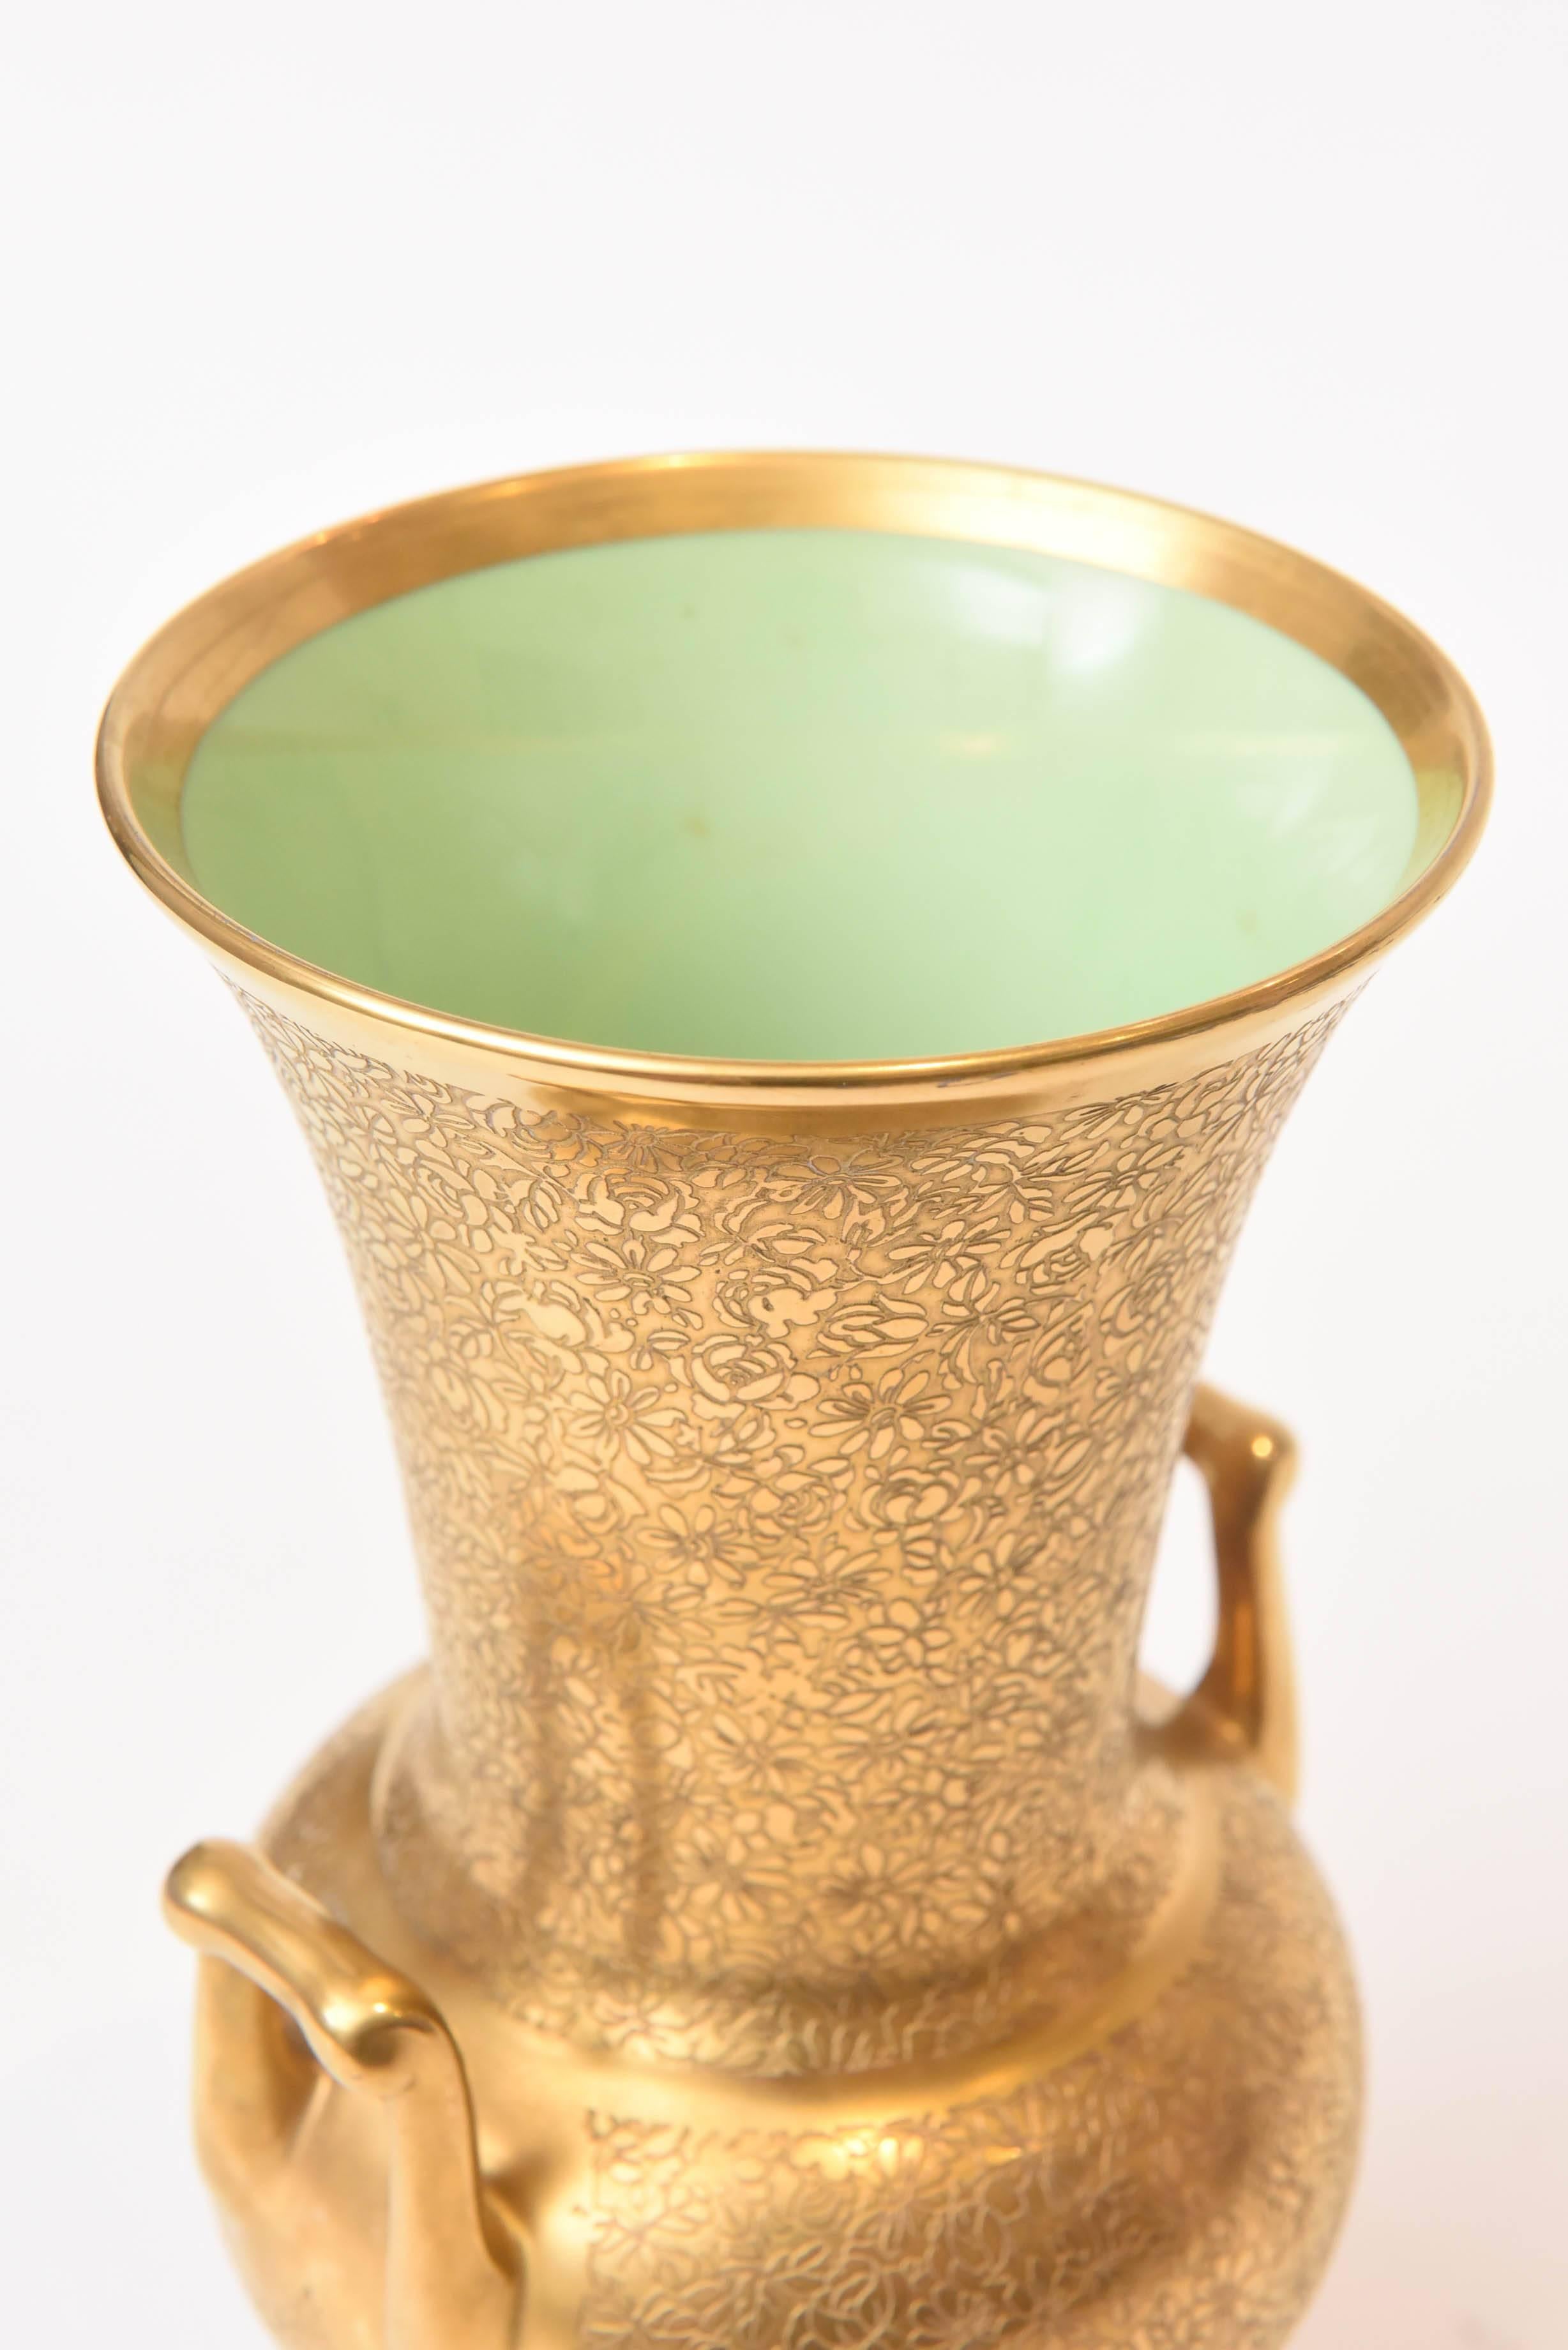 Early 20th Century Antique All-Over 24-Karat Gold Acid Etched Handel Vase with Light Green Interior